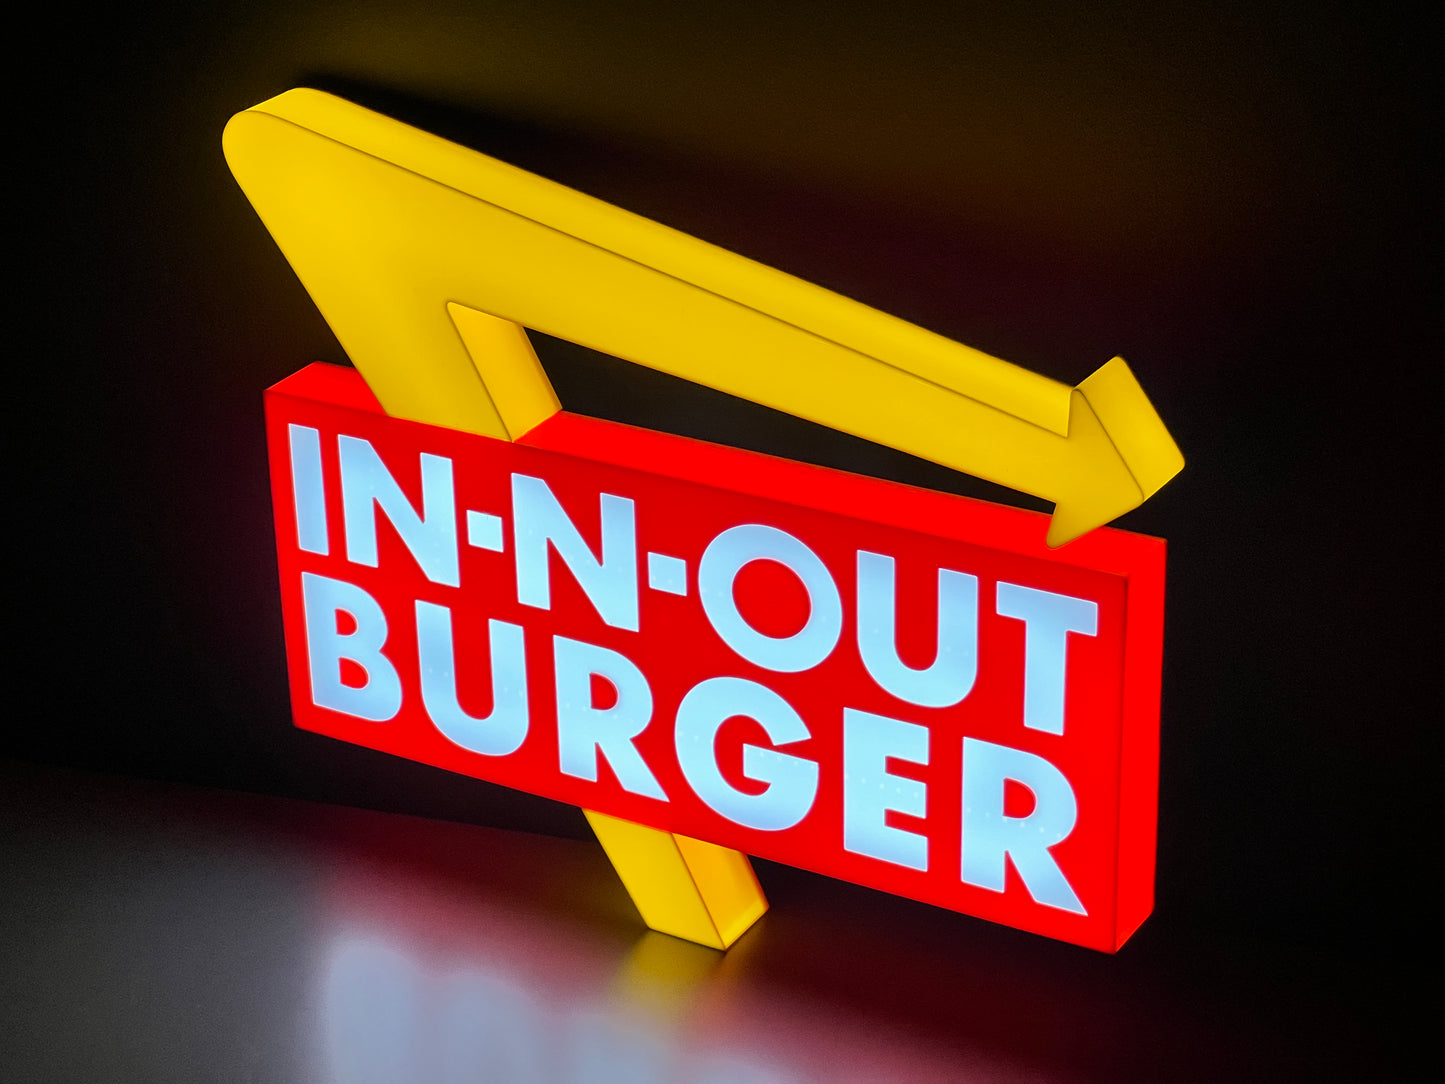 Insegna luminosa In-N-Out Burger